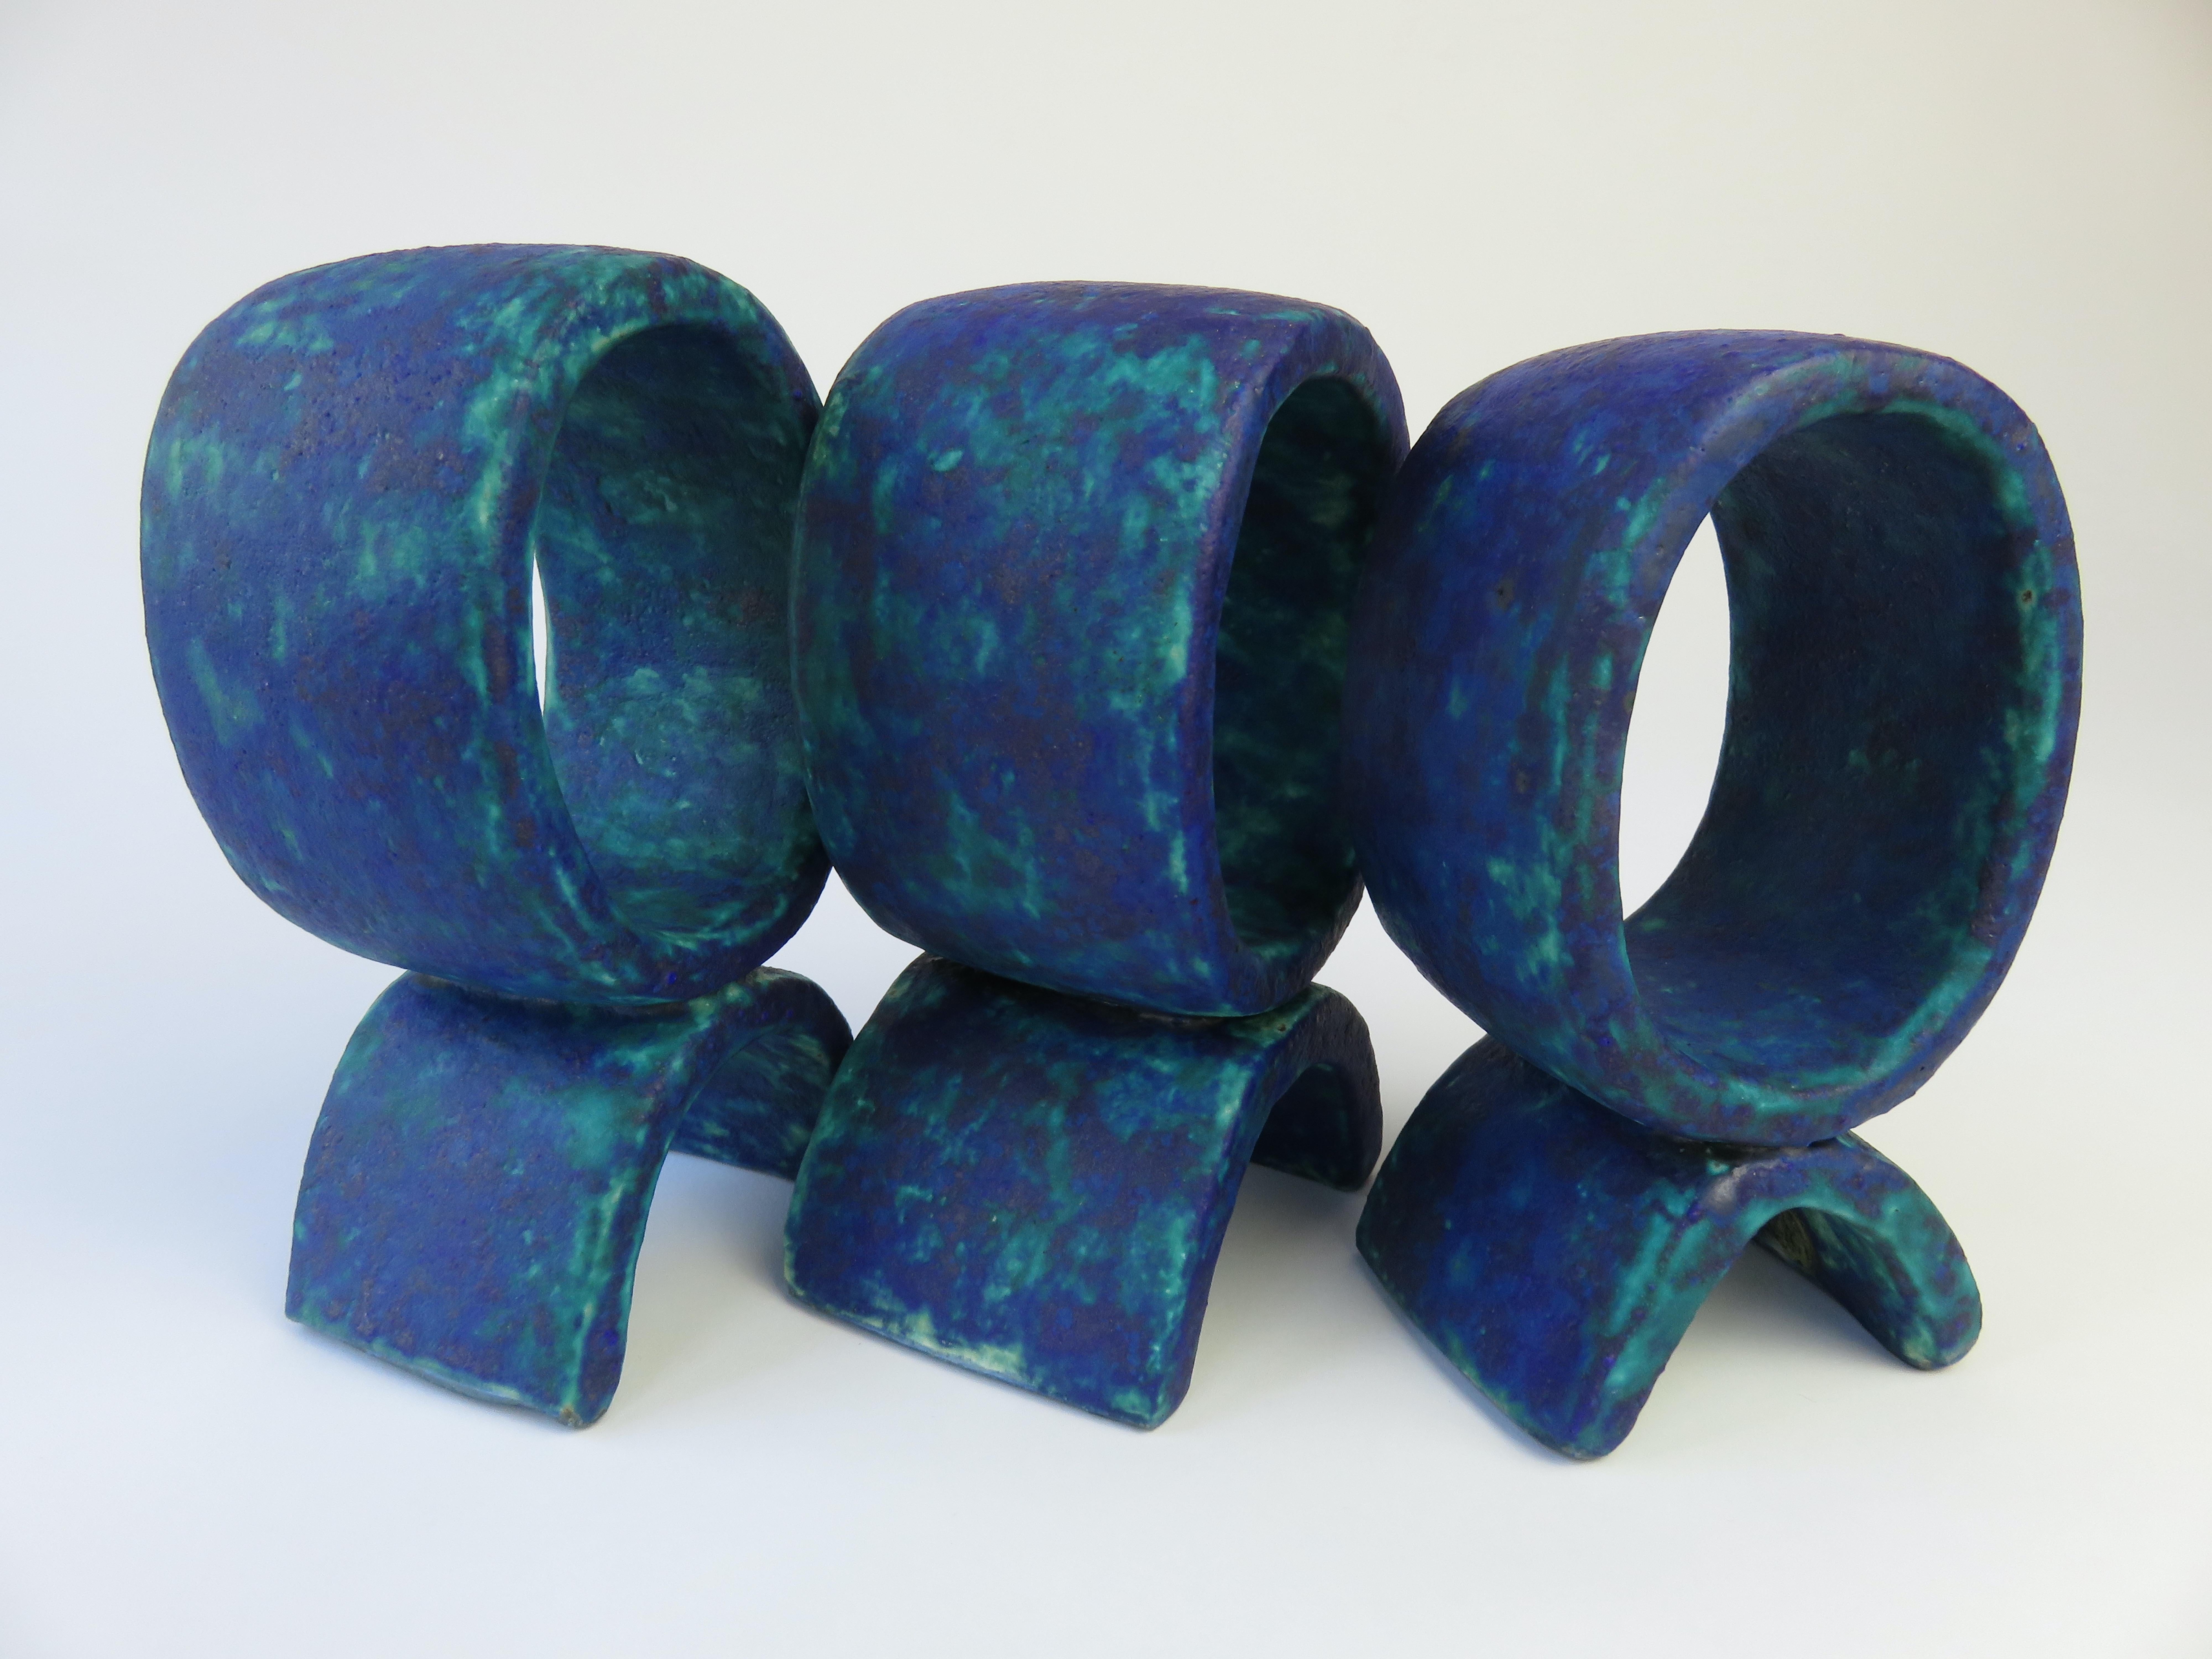 Mottled Turquoise and Deep Blue, 3 Ceramic Totems, Single Rings on Curved Legs For Sale 8